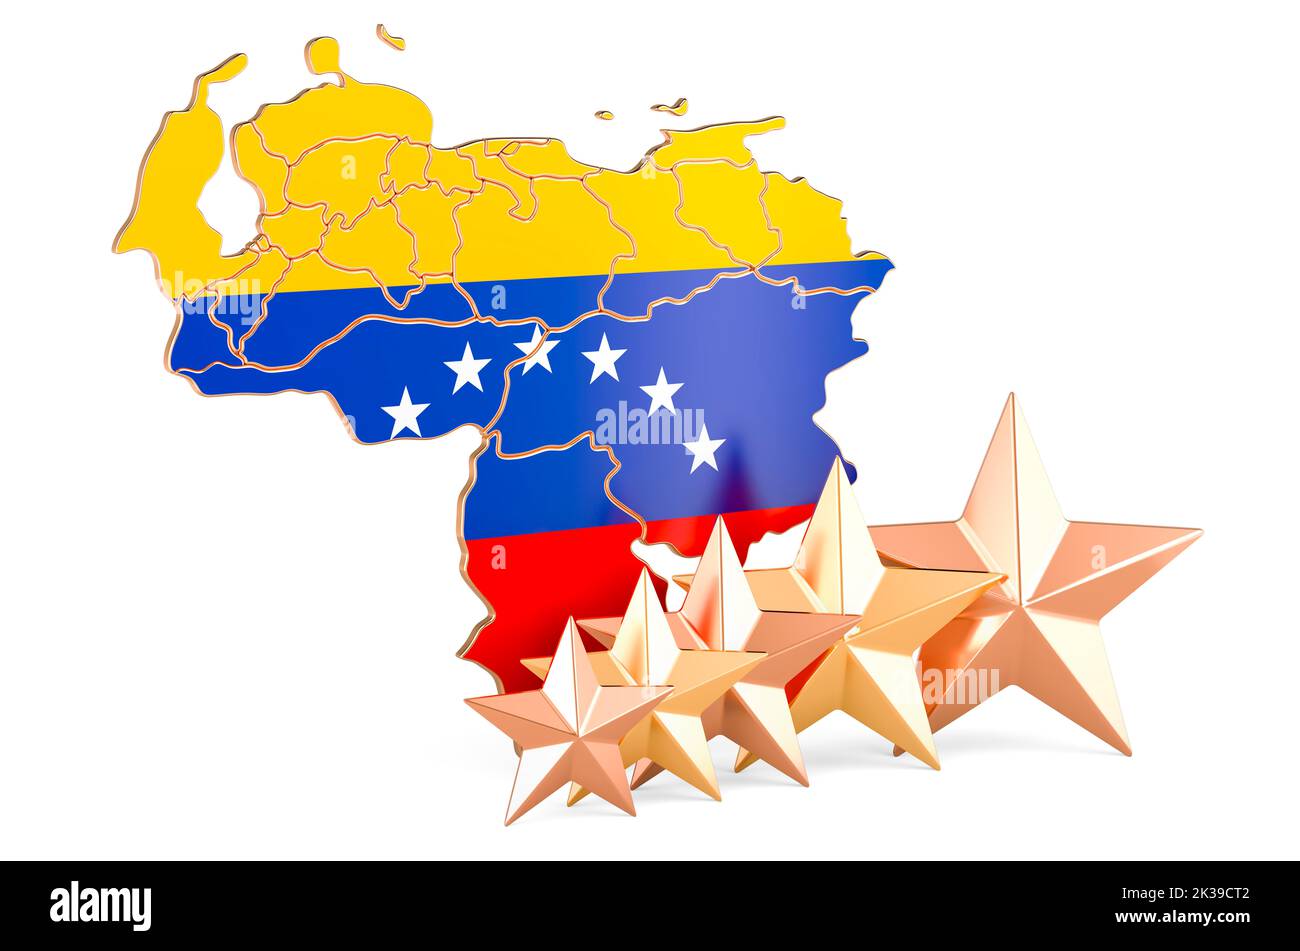 Venezuelan map with five stars. Rating, quality, service in Venezuela. 3D rendering isolated on white background Stock Photo